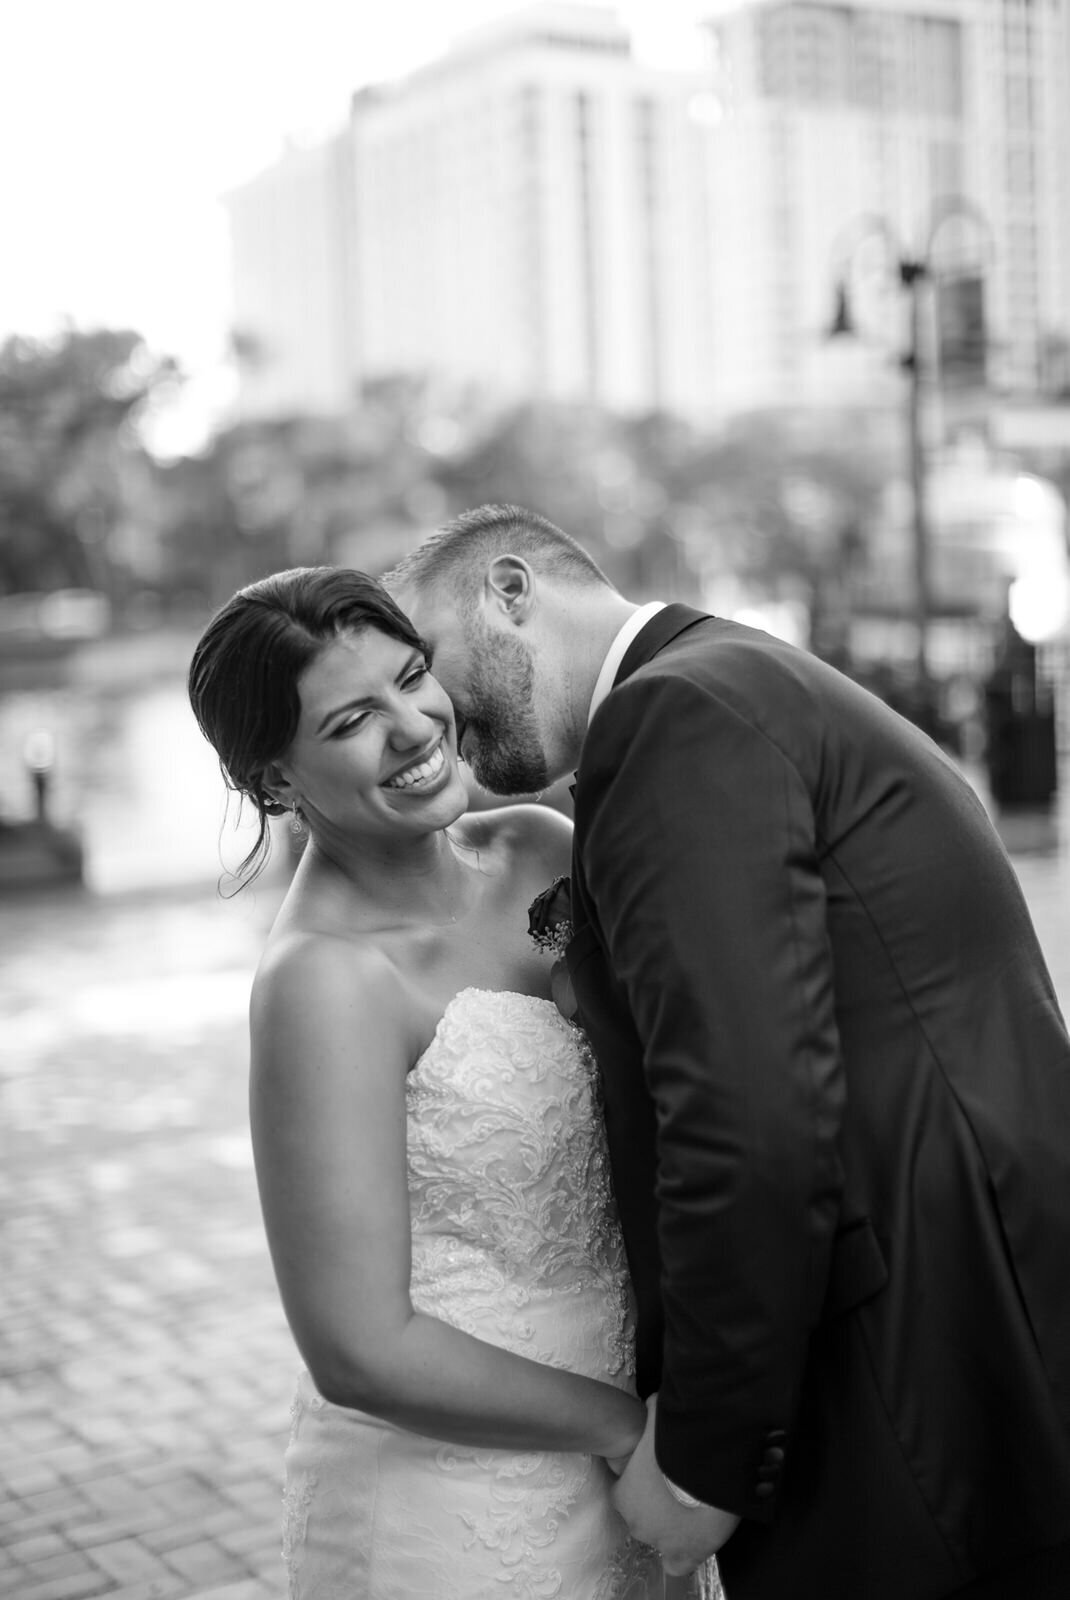 Black and white image of a bride and groom o ntheir wedding day near Las Olas